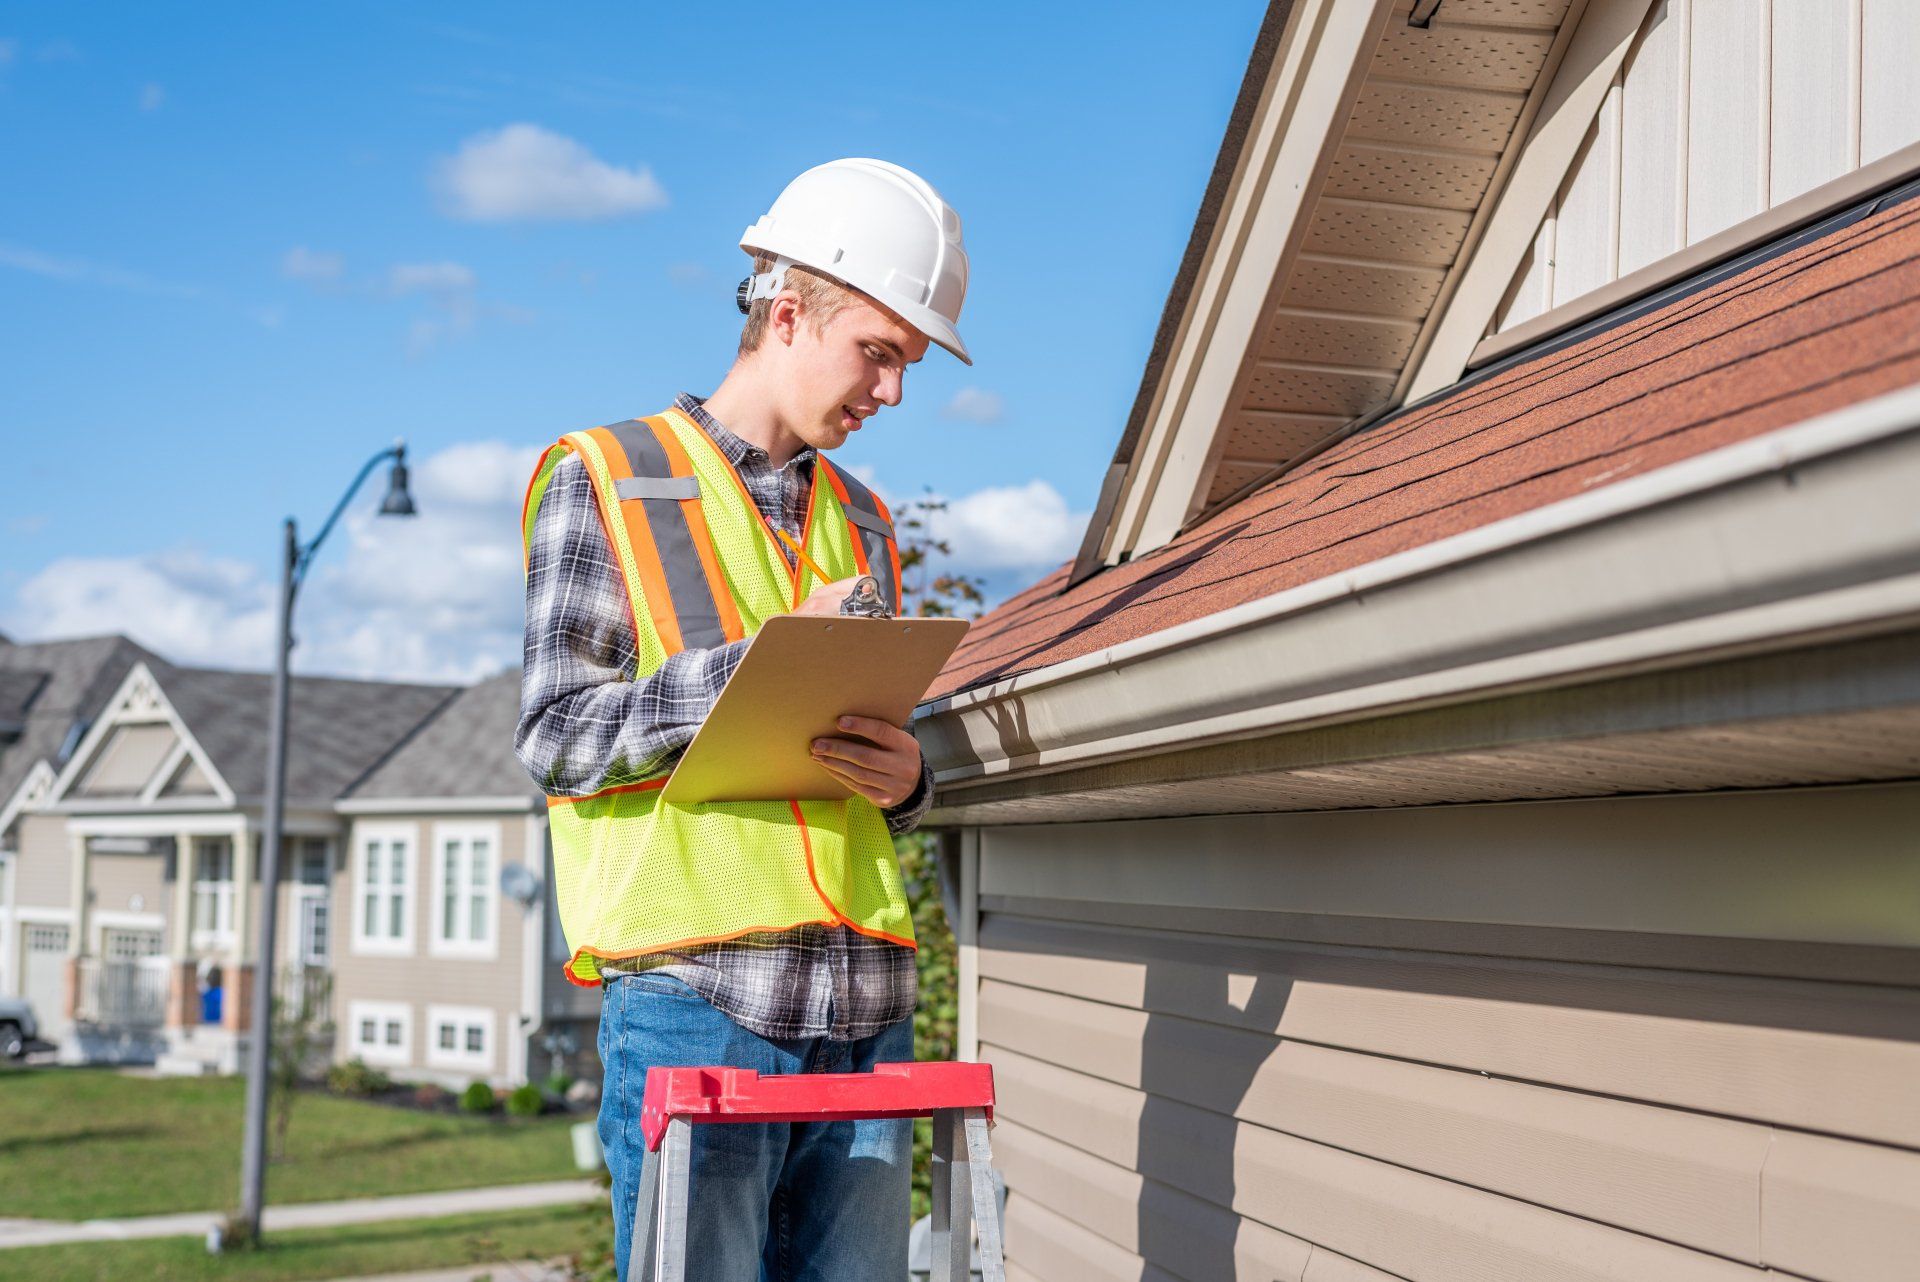 Roof and exterior property inspections in the greater Dallas area